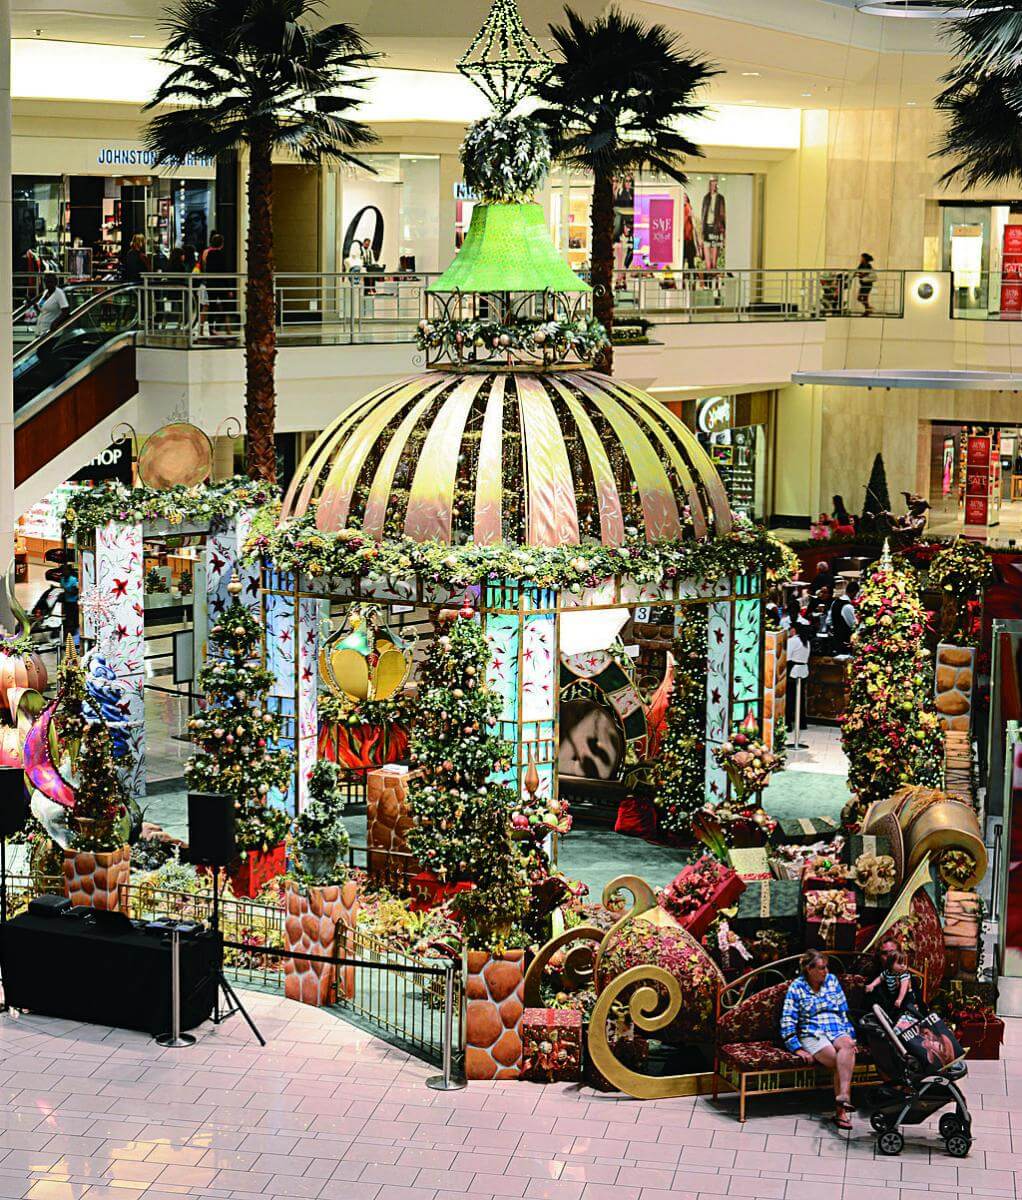 What's Coming Soon to Gardens Mall in the Palm Beaches